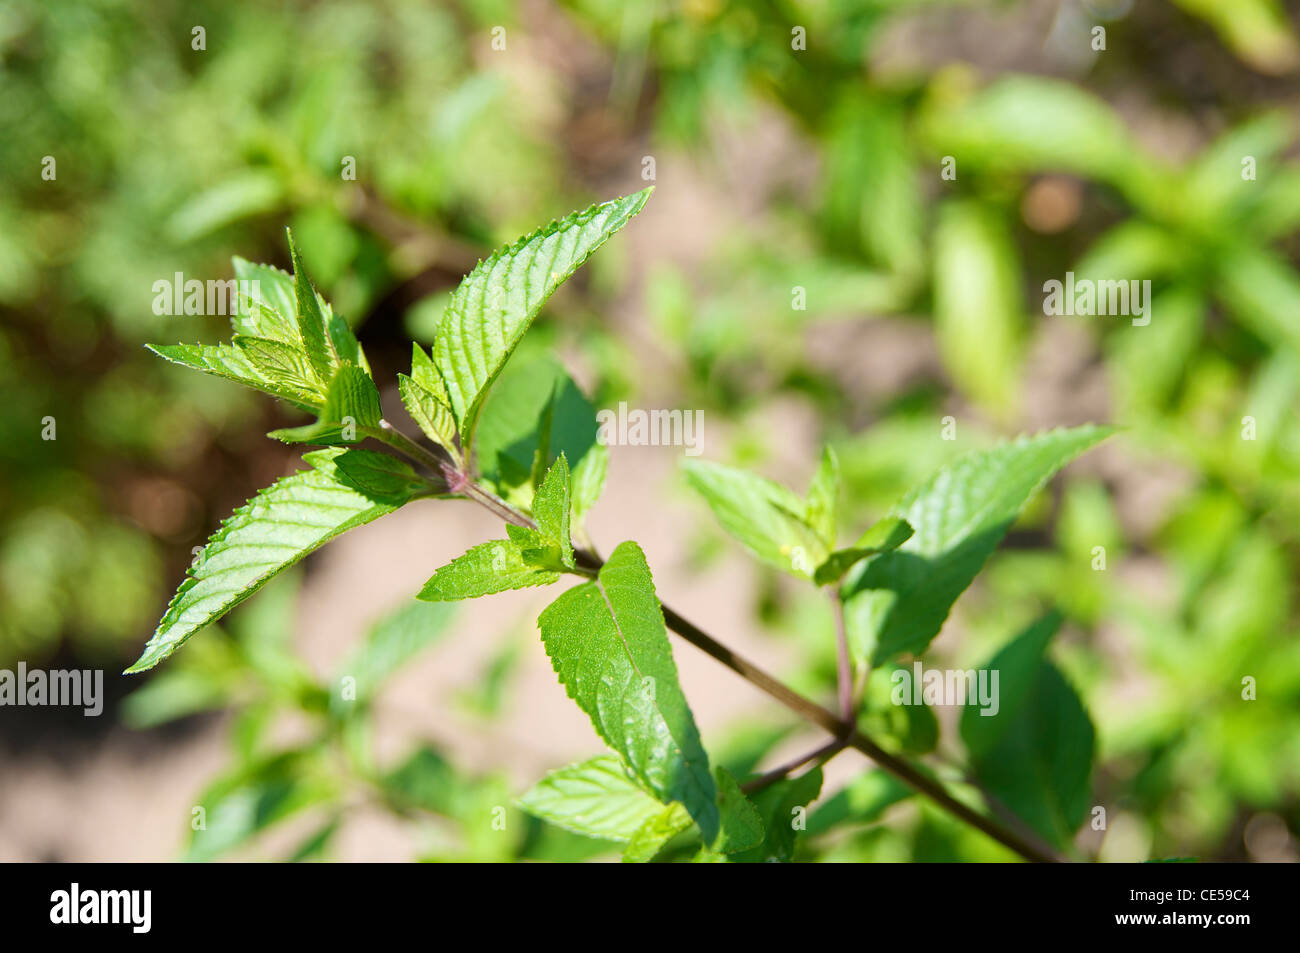 Peppermint (Mentha × piperita) plant, a cross between watermint and spearmint. Stock Photo